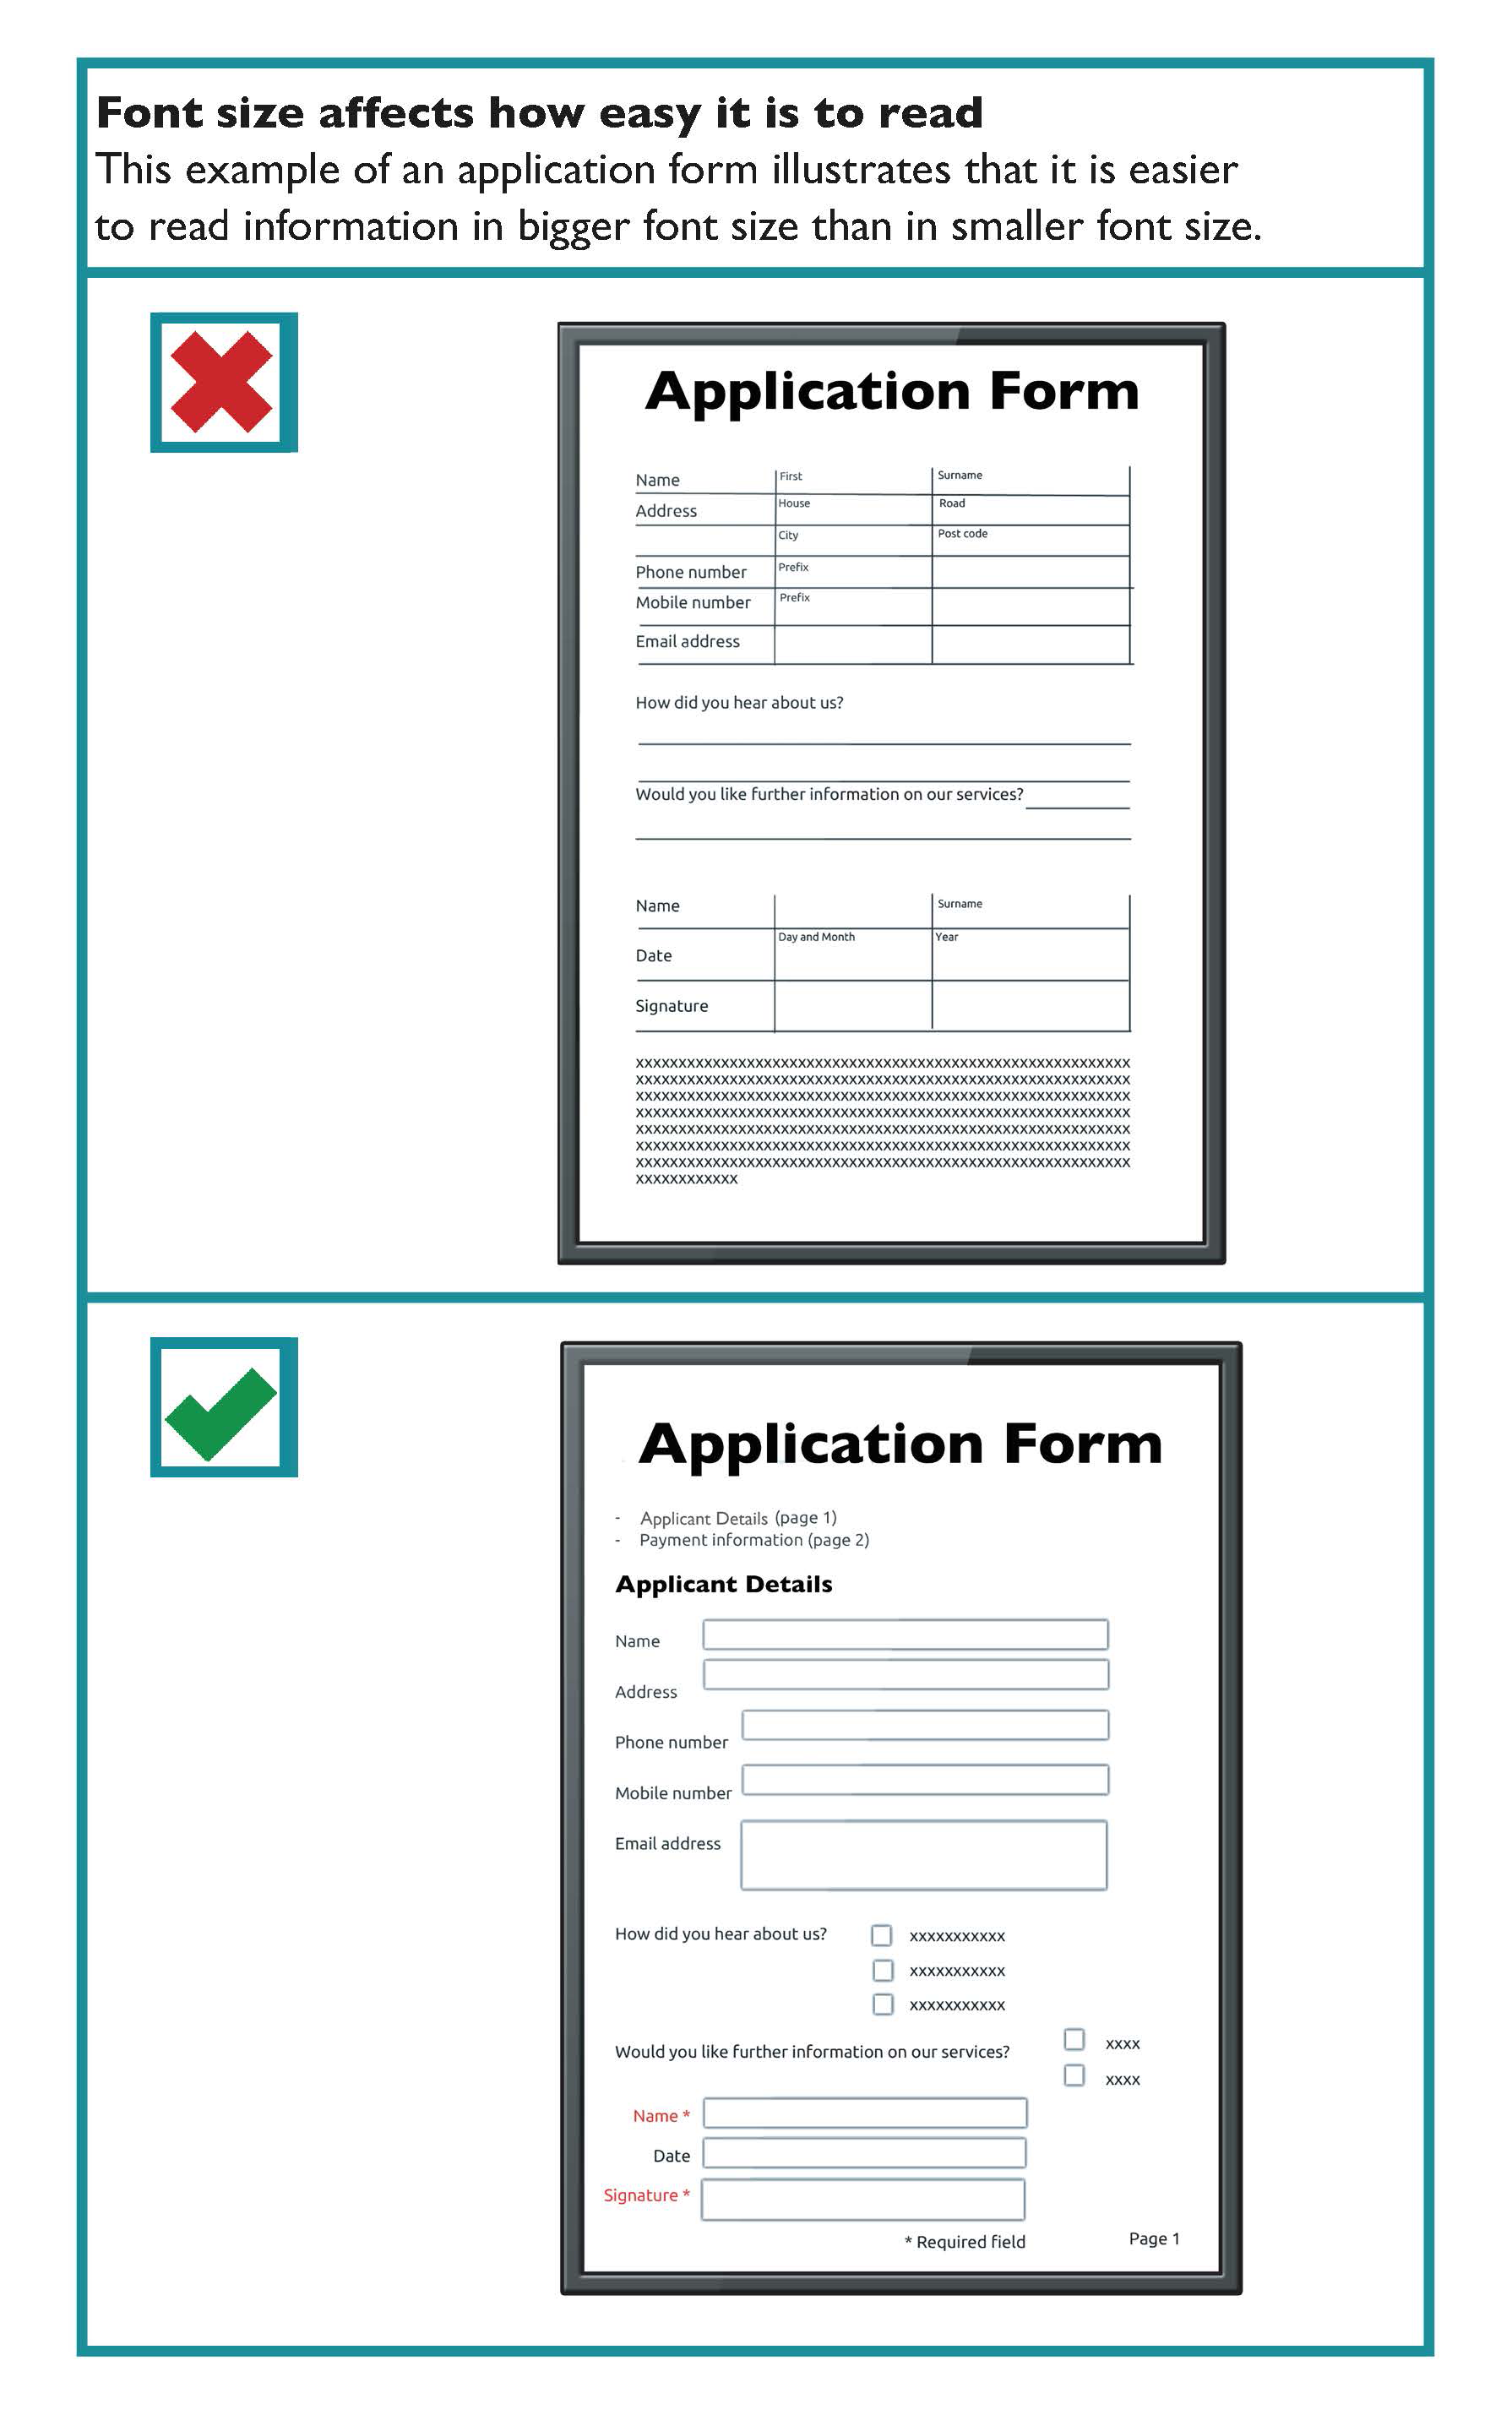 An example of how font size affects how easy it is to read. One application form has a cluttered layout and very small text. The other application form has a simpler layout, bigger text and is much easier to read.